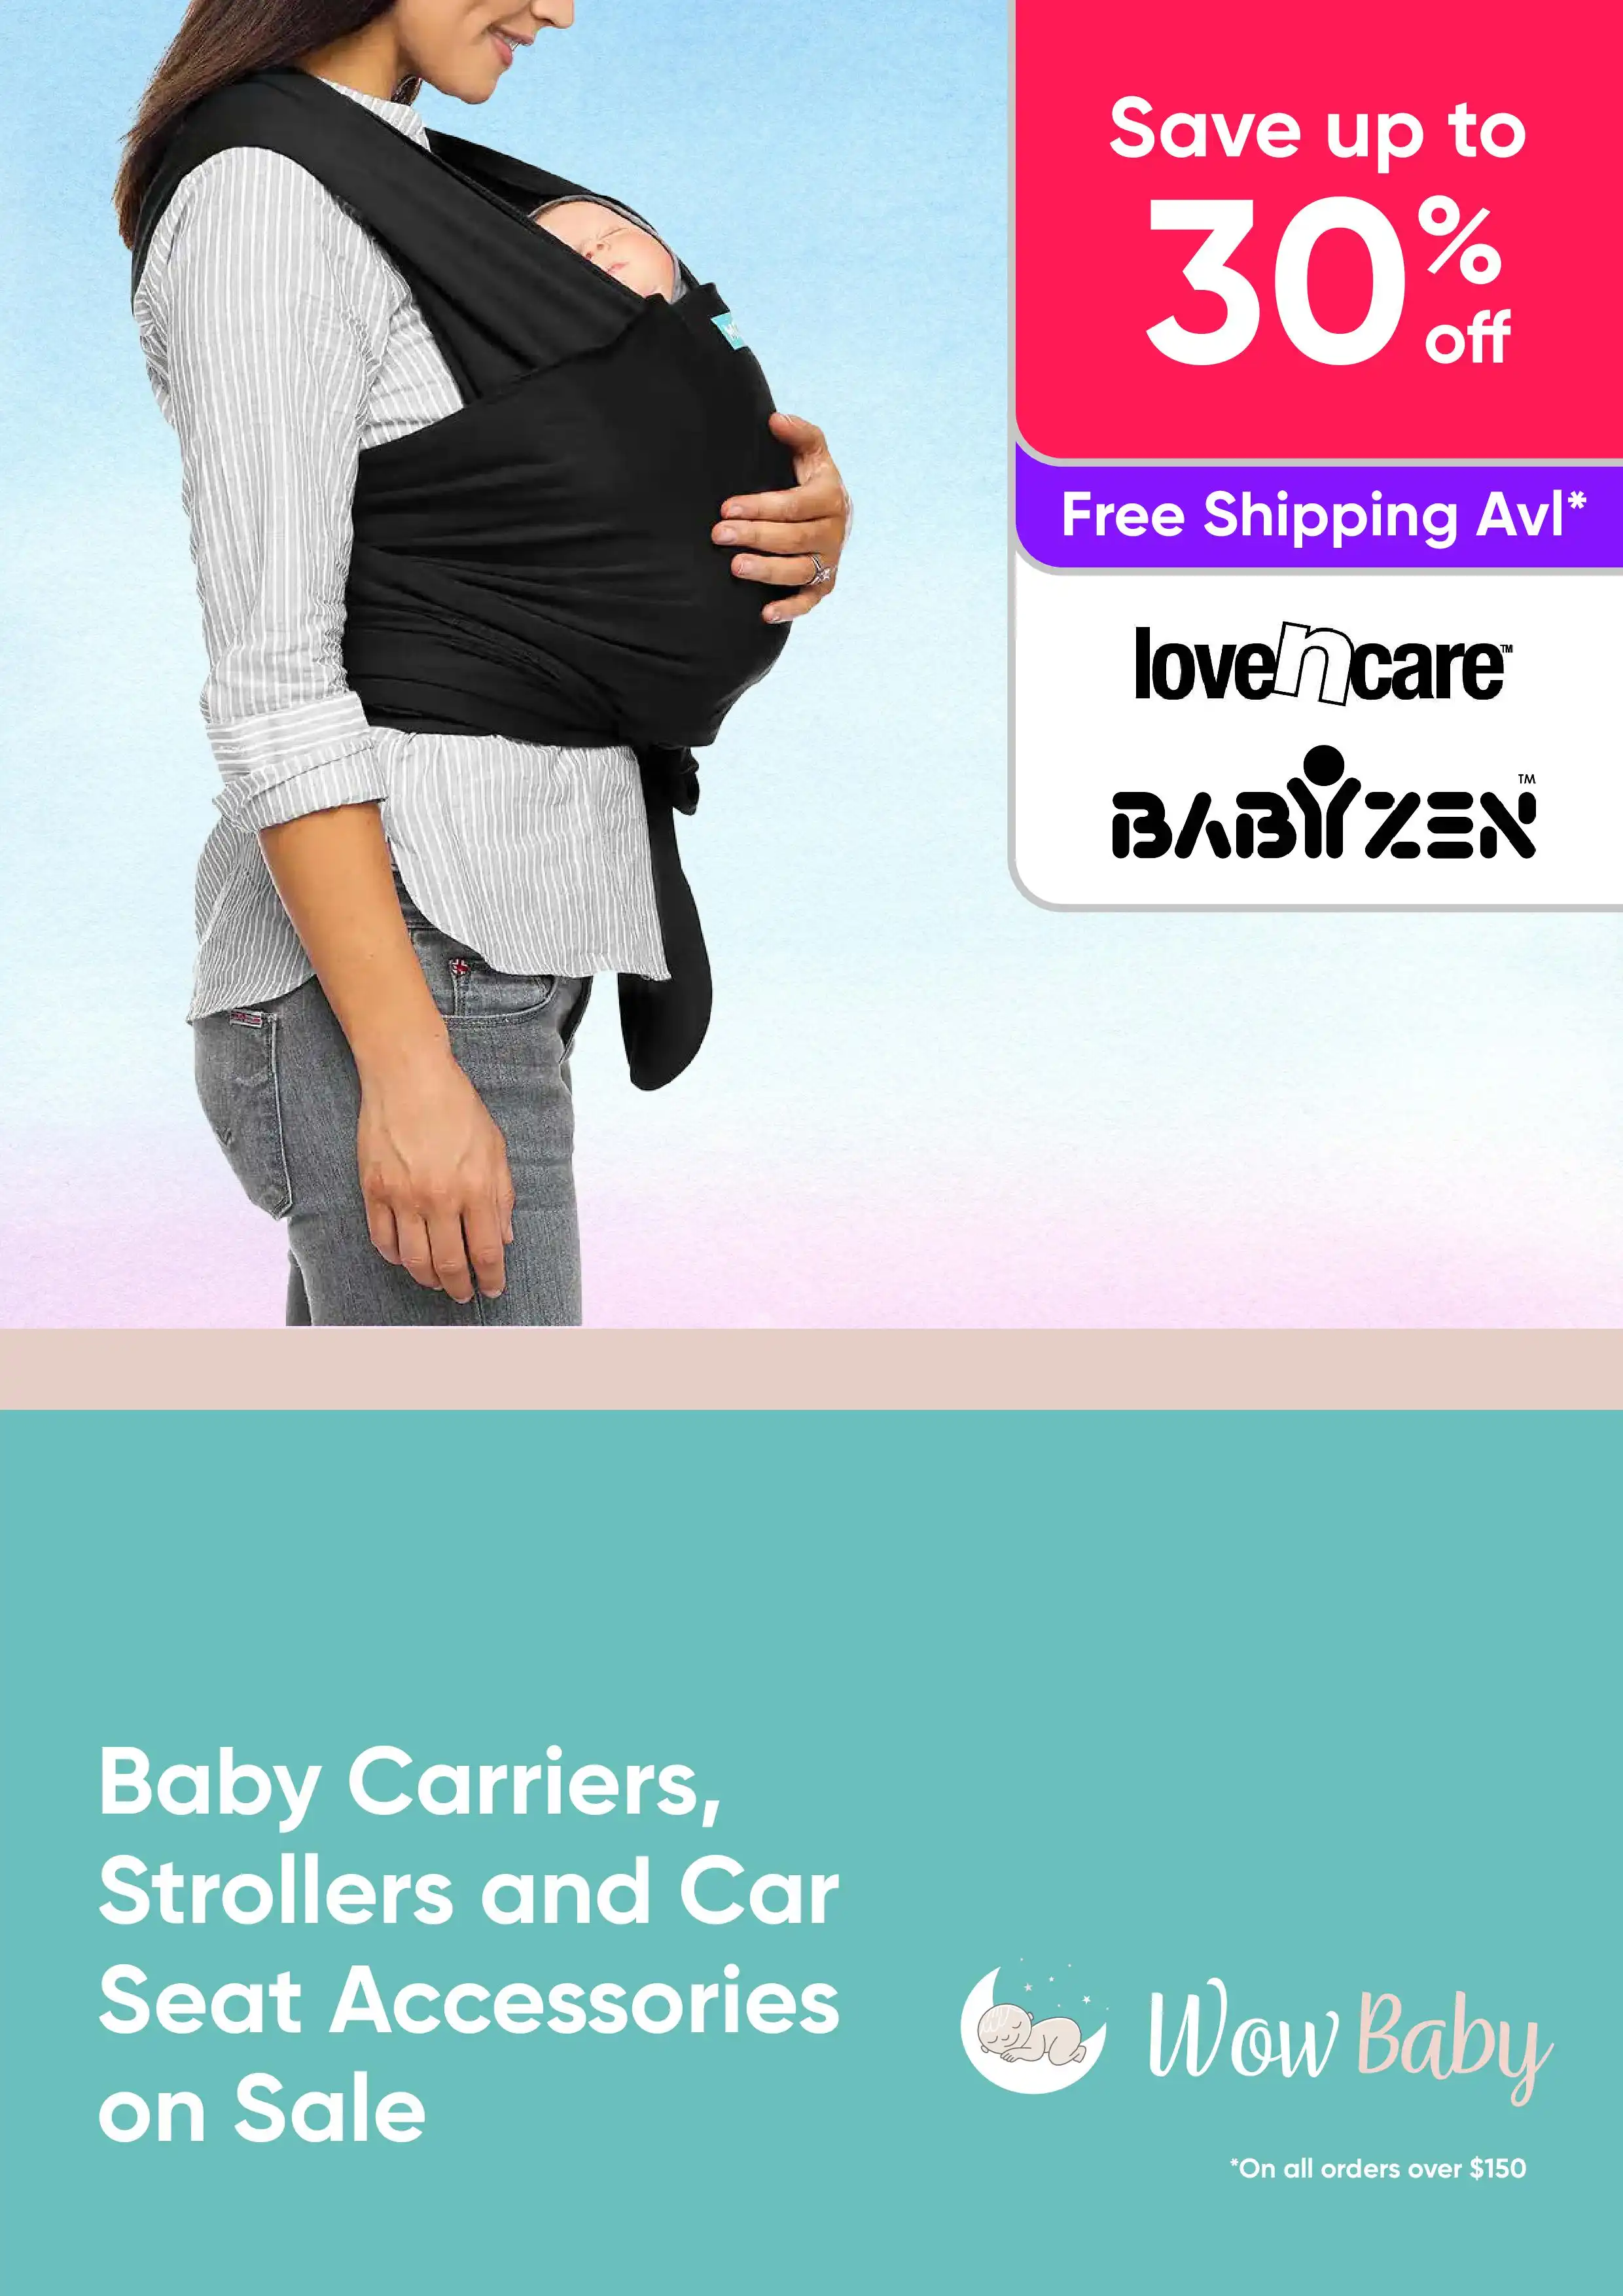 Baby Carriers, Strollers and Car Seat Accessories on Sale - Save up to 30% off